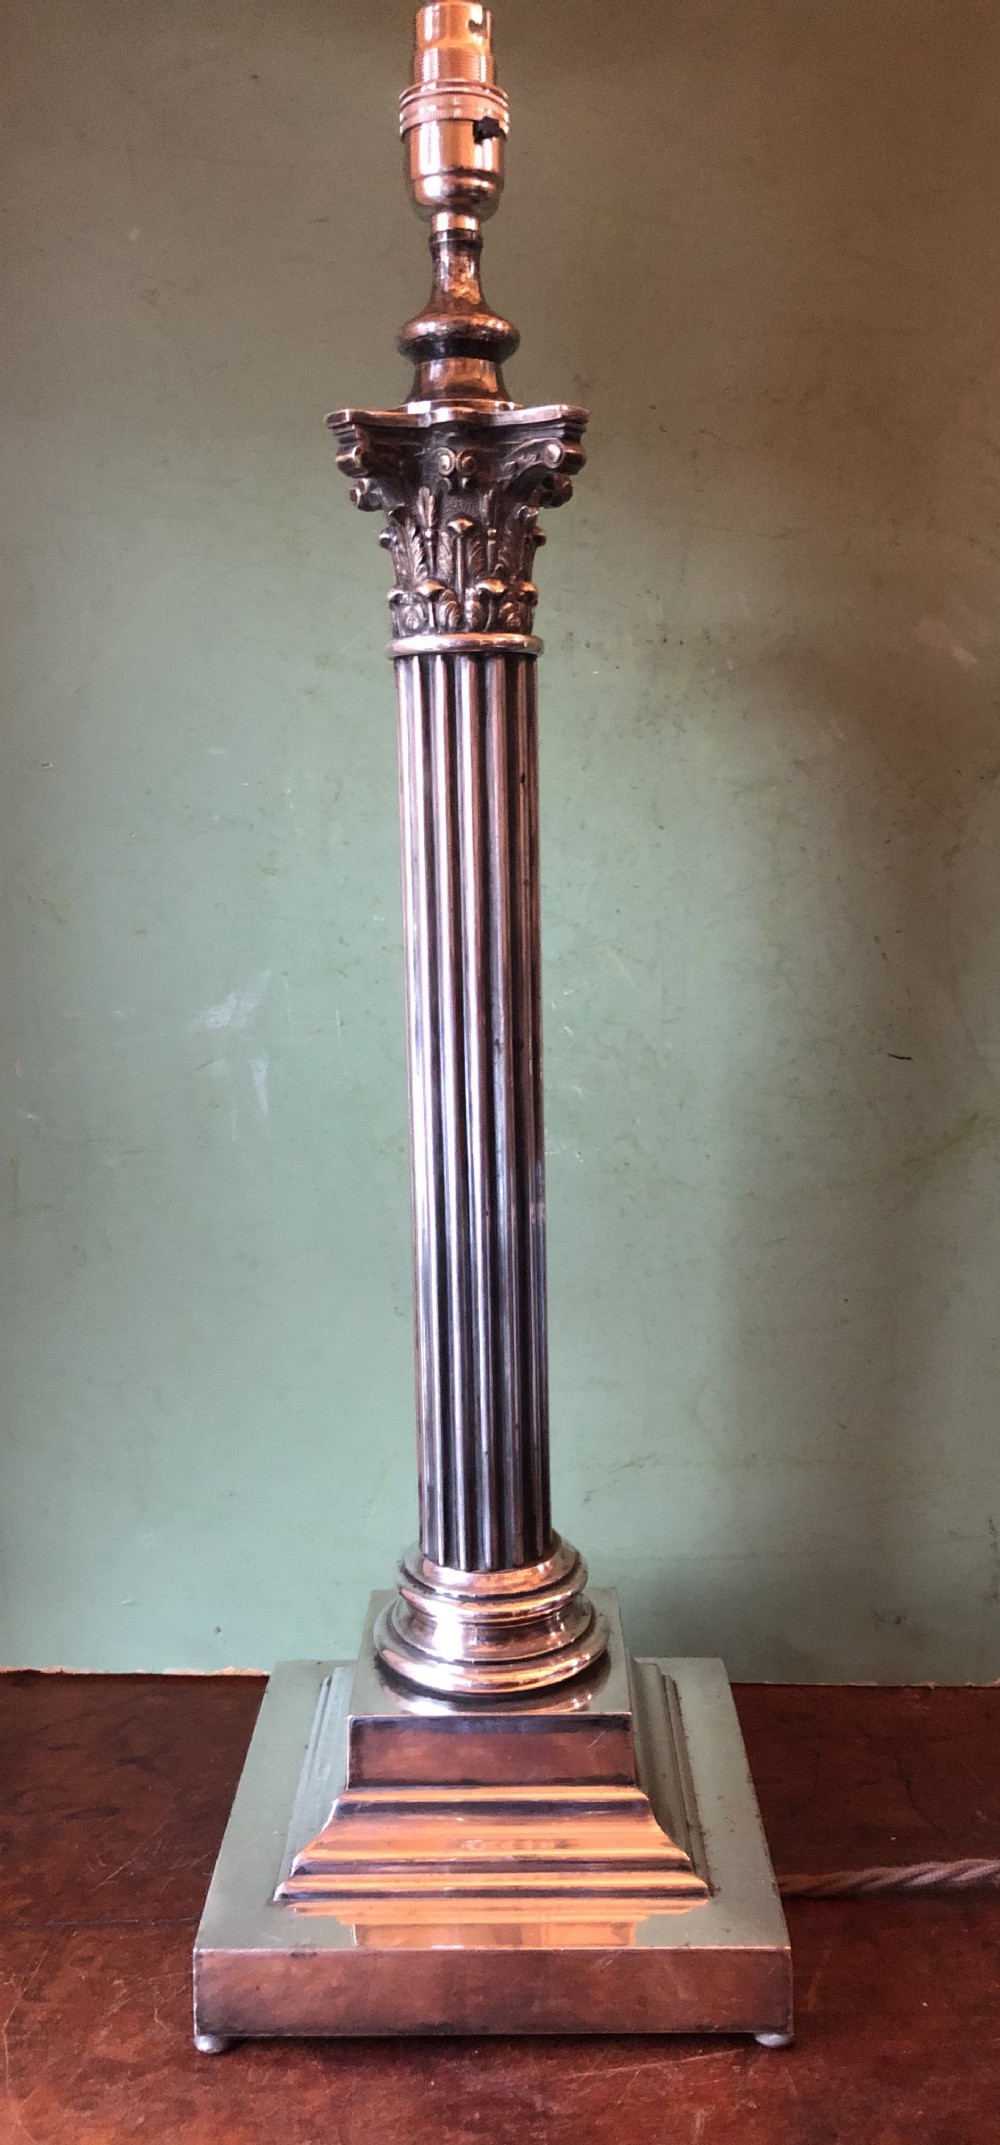 late c19th early c20th silverplated table lamp of classical reeded column form with a corinthian capital top